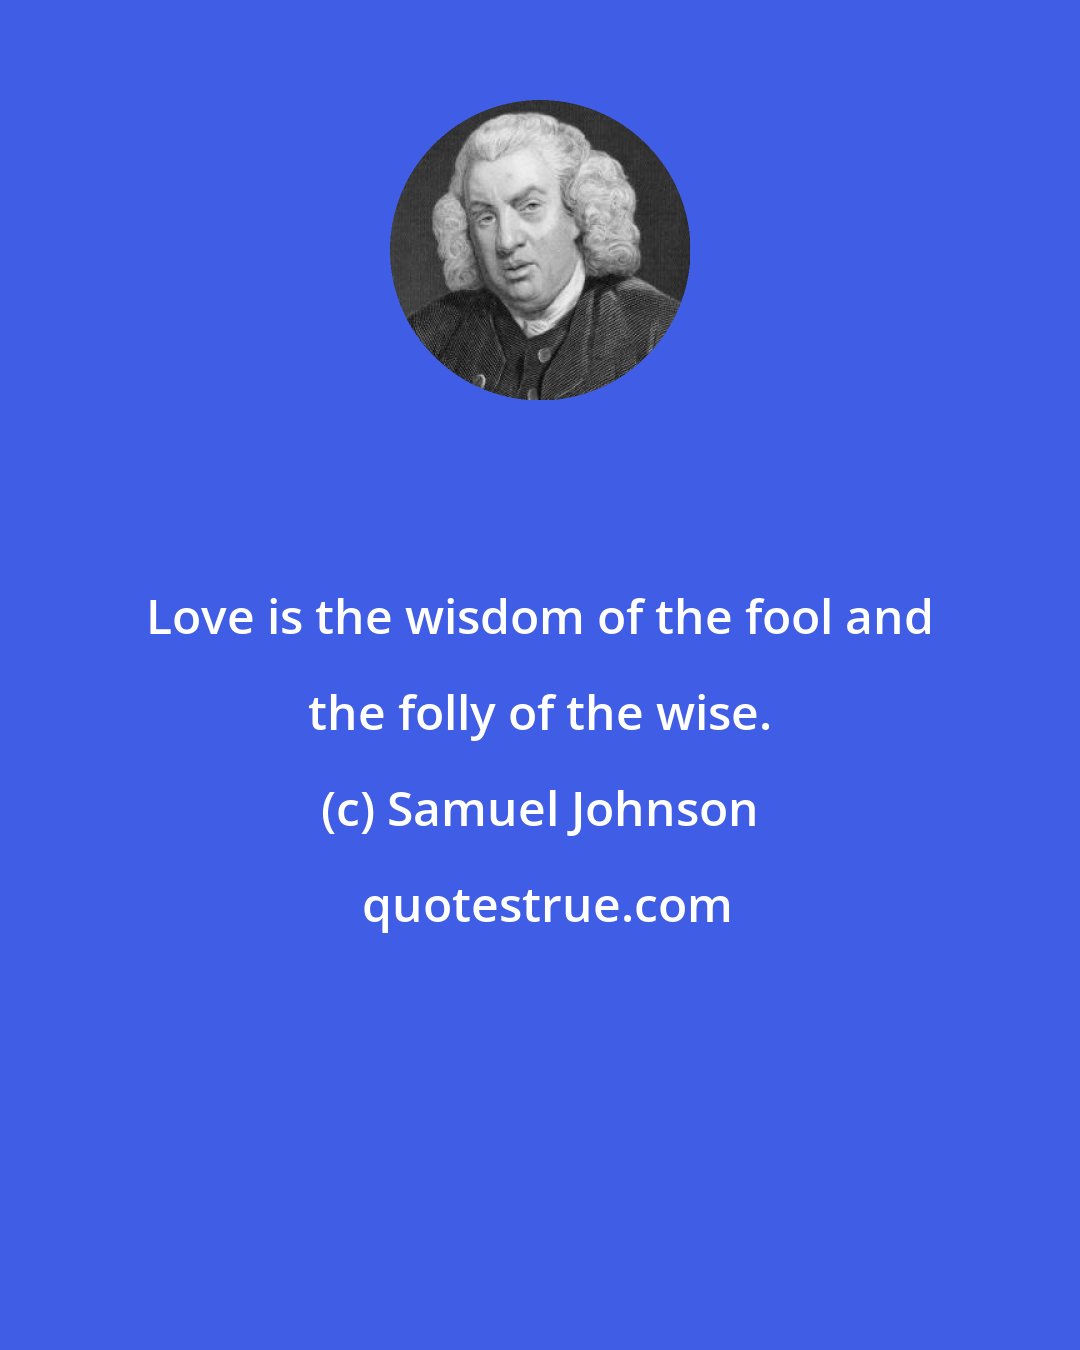 Samuel Johnson: Love is the wisdom of the fool and the folly of the wise.